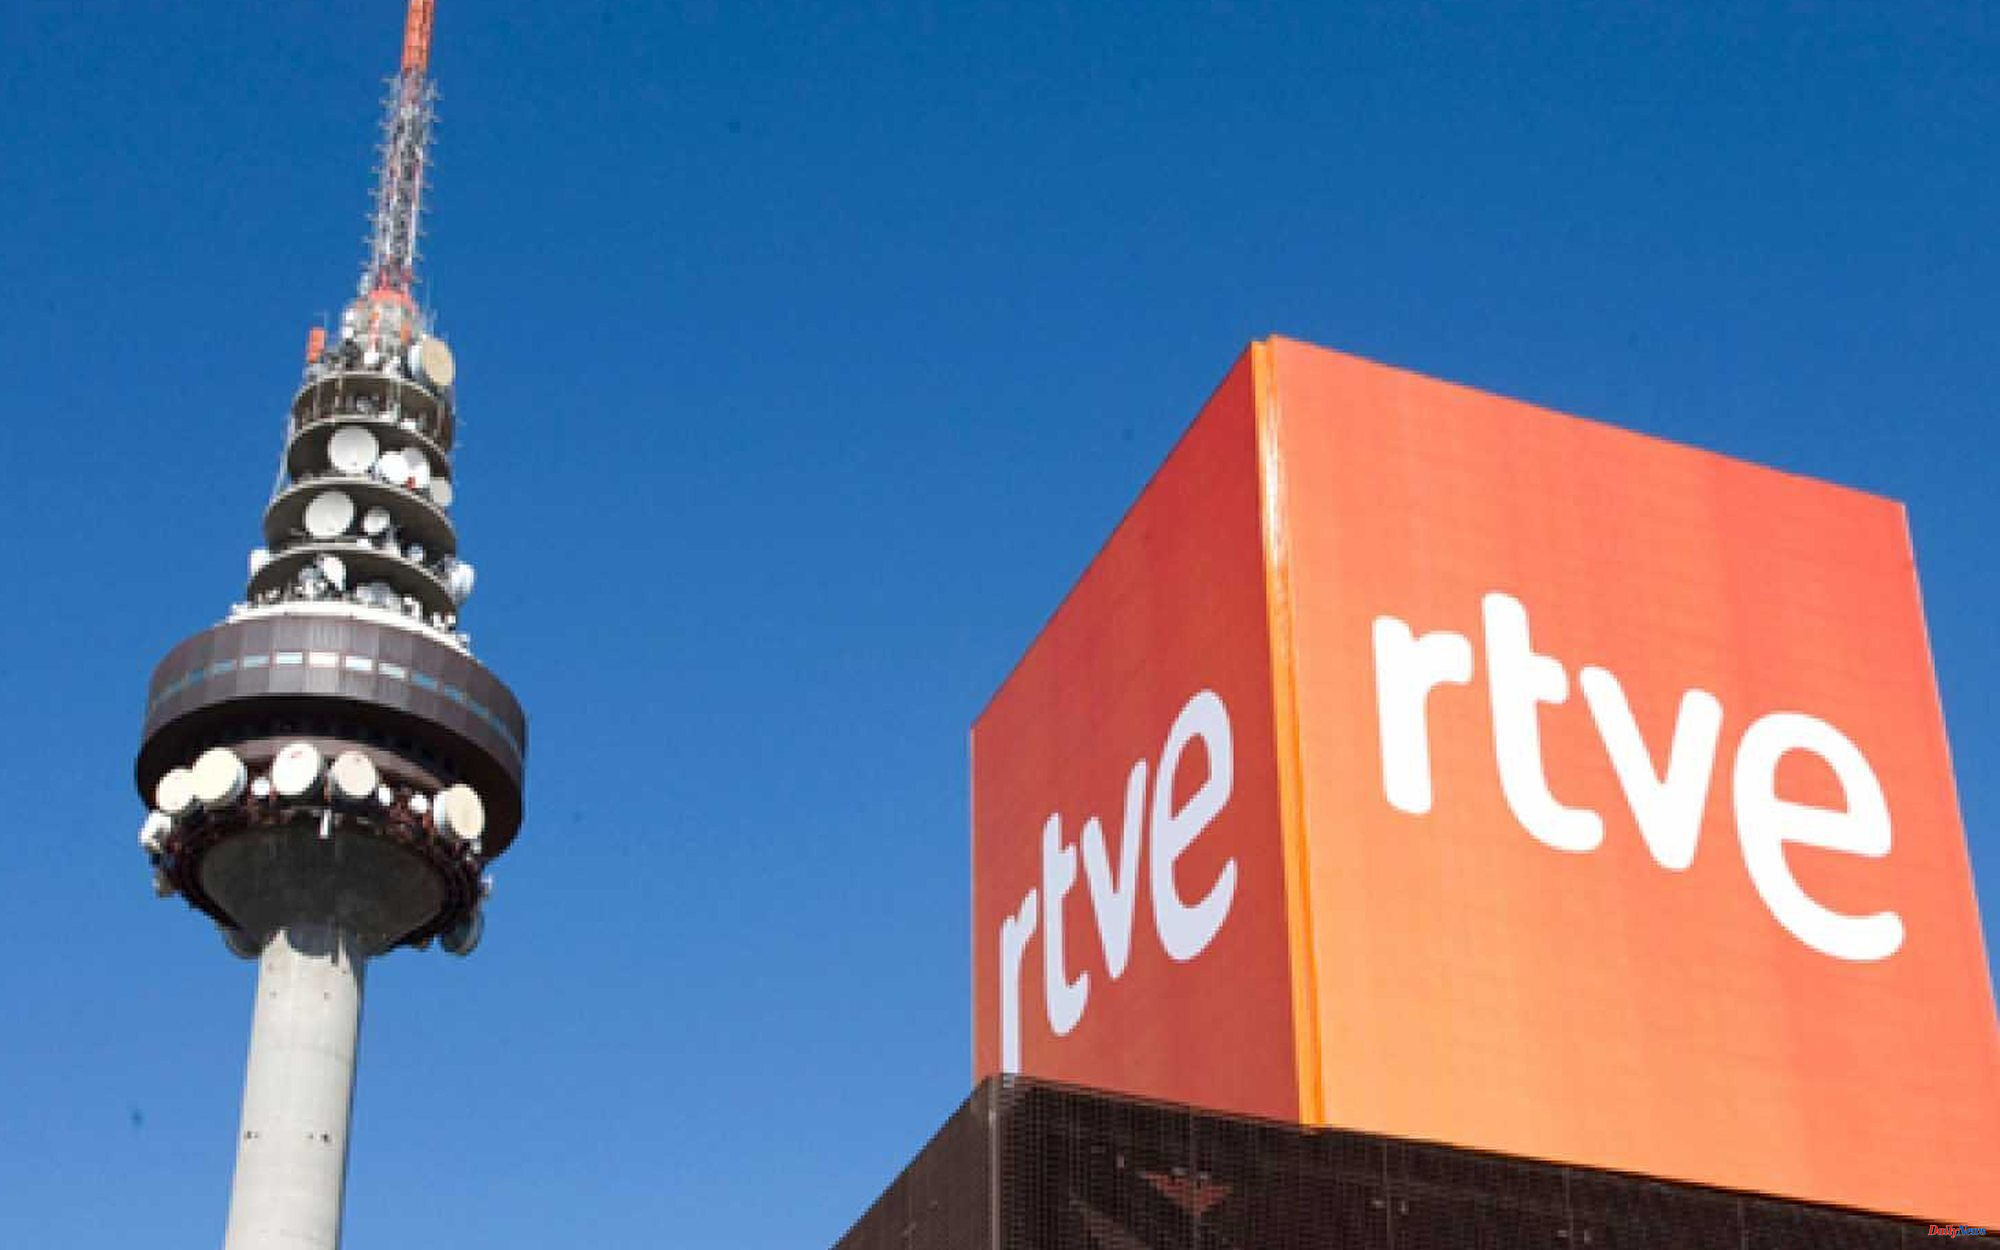 Appeal The FAPE and the APM challenge the call for RTVE positions for not requiring a degree in Journalism